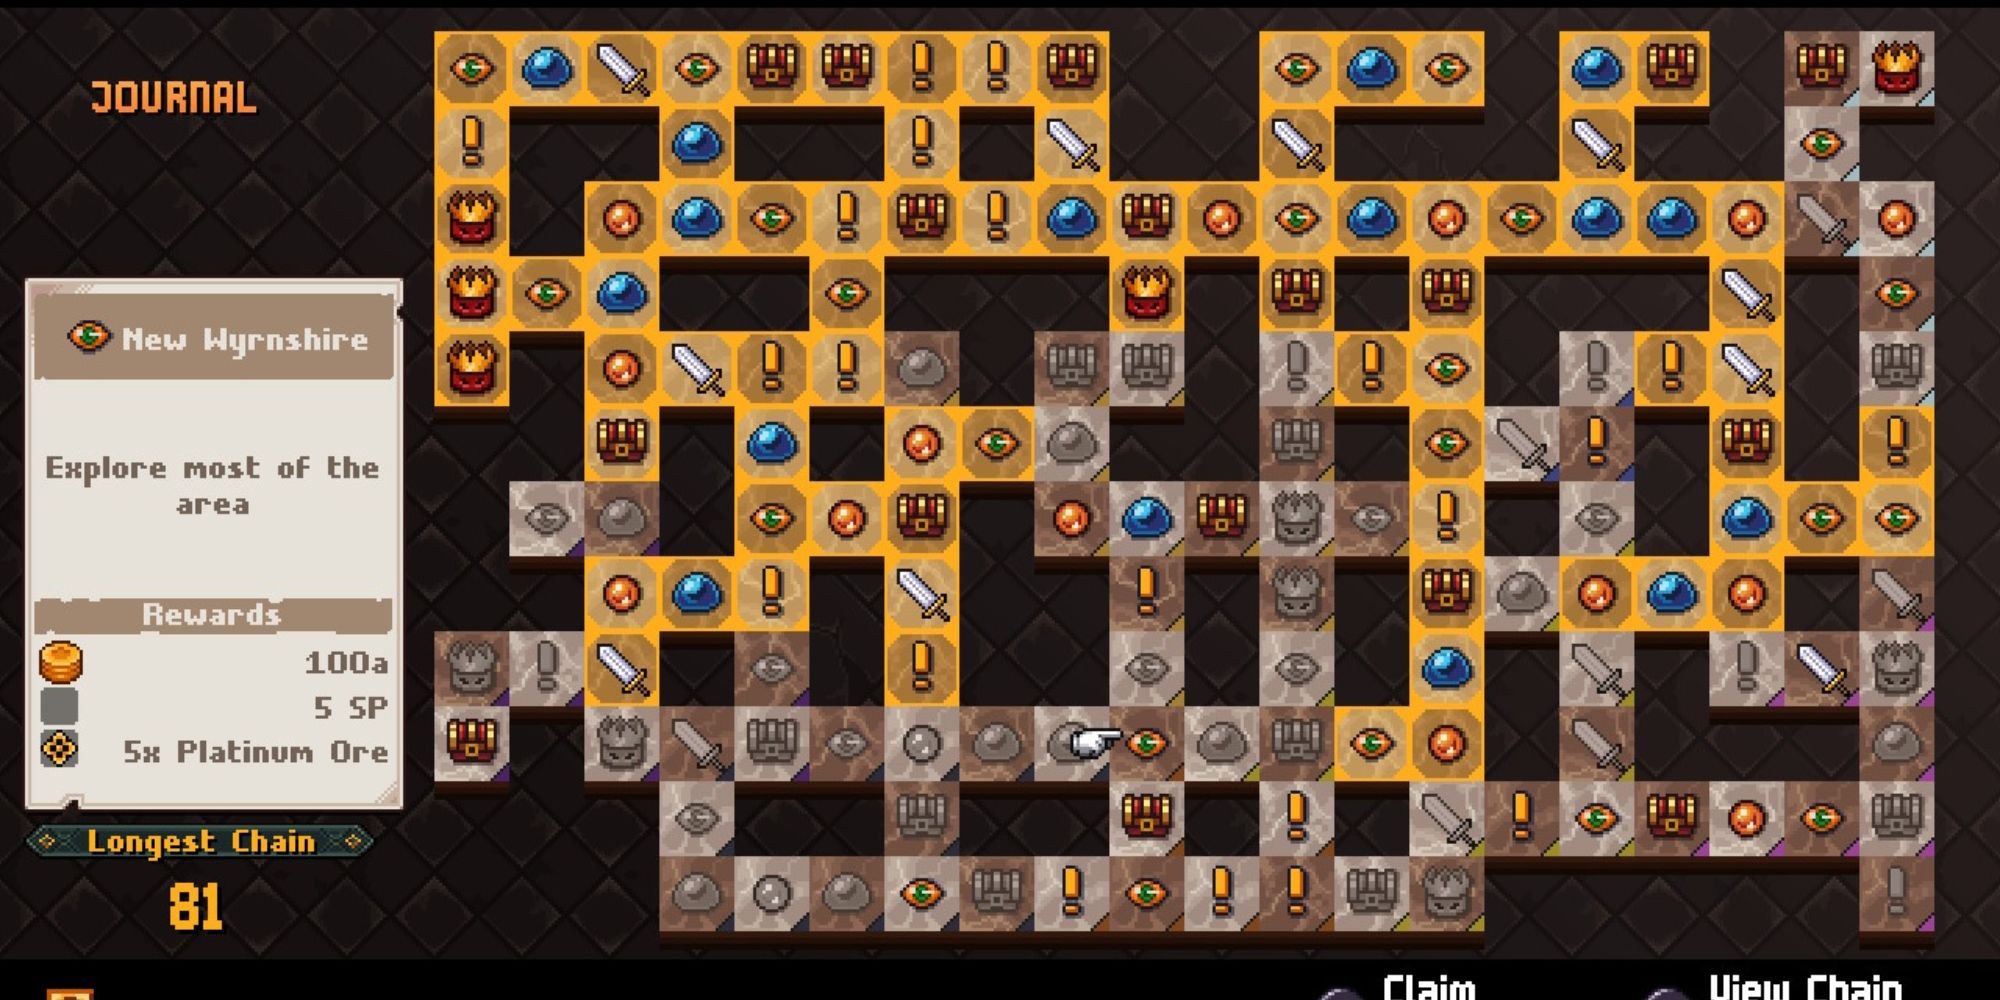 Chained Echoes - New Wrynshire Reward Board tile showing a currently un-chained one